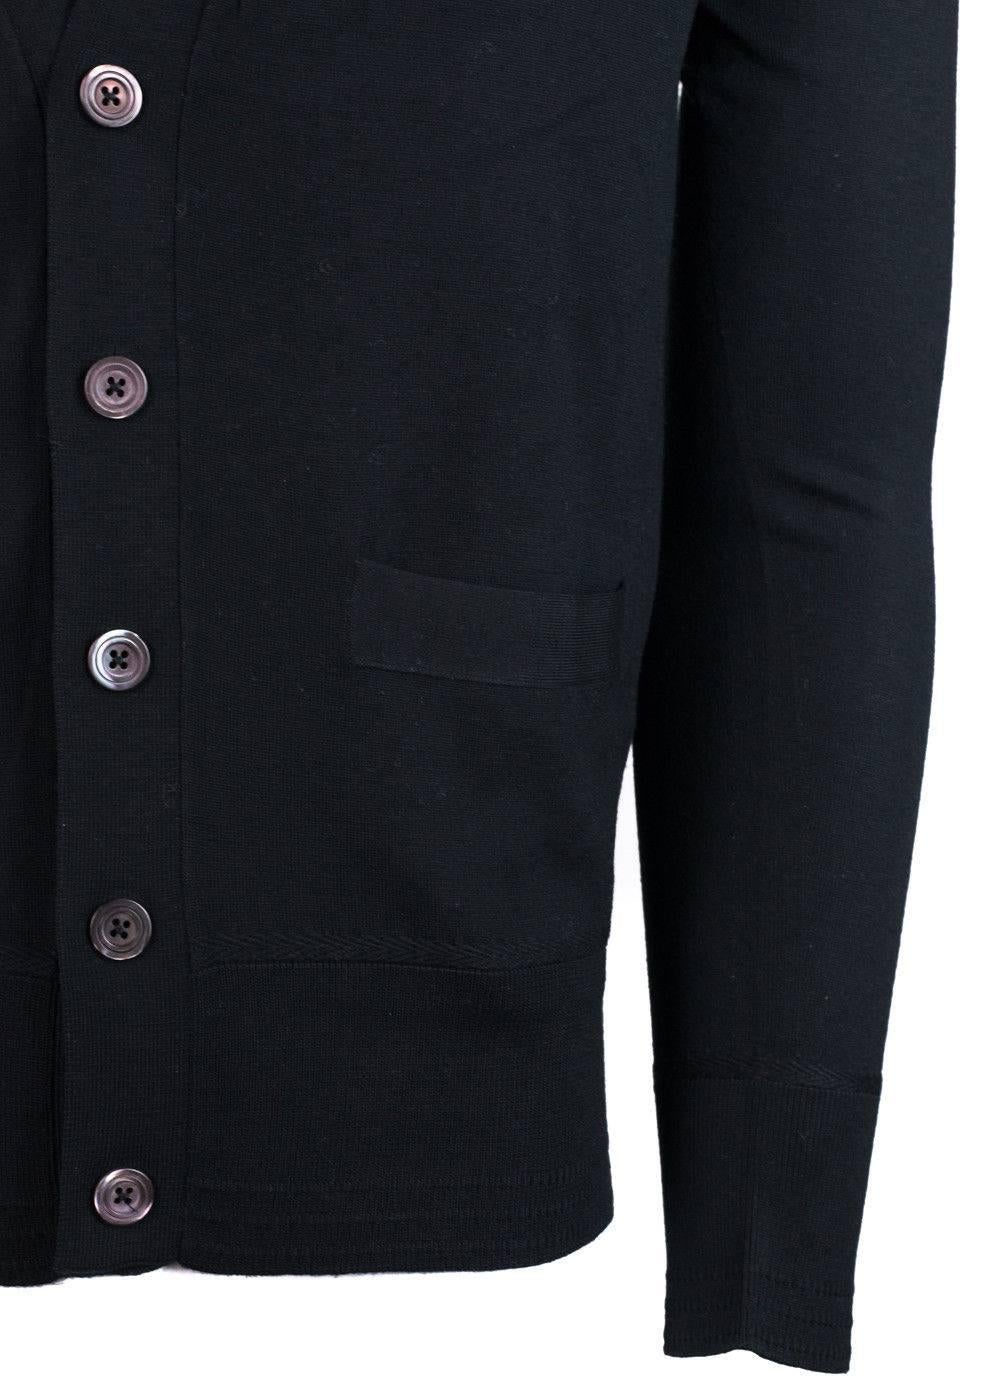 Brand New Tom Ford Cardigan
Original with Tags 
Retails in Stores & Online for $750
Size USA Medium

The best fall essential this season will be your Tom Ford Cardigan. This piece was woven using high quality wool in the heart of Italy. You can